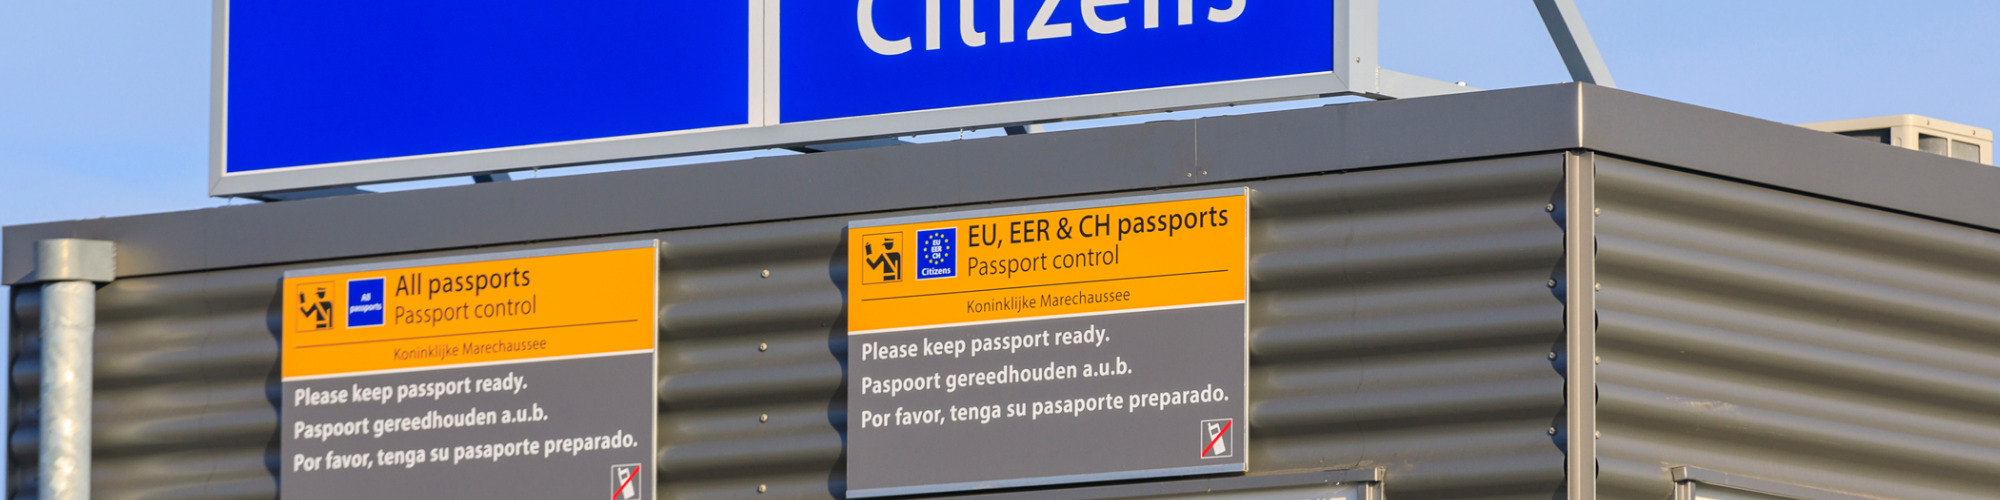 The UK’s New Immigration System for Work & Business - What’s New? 